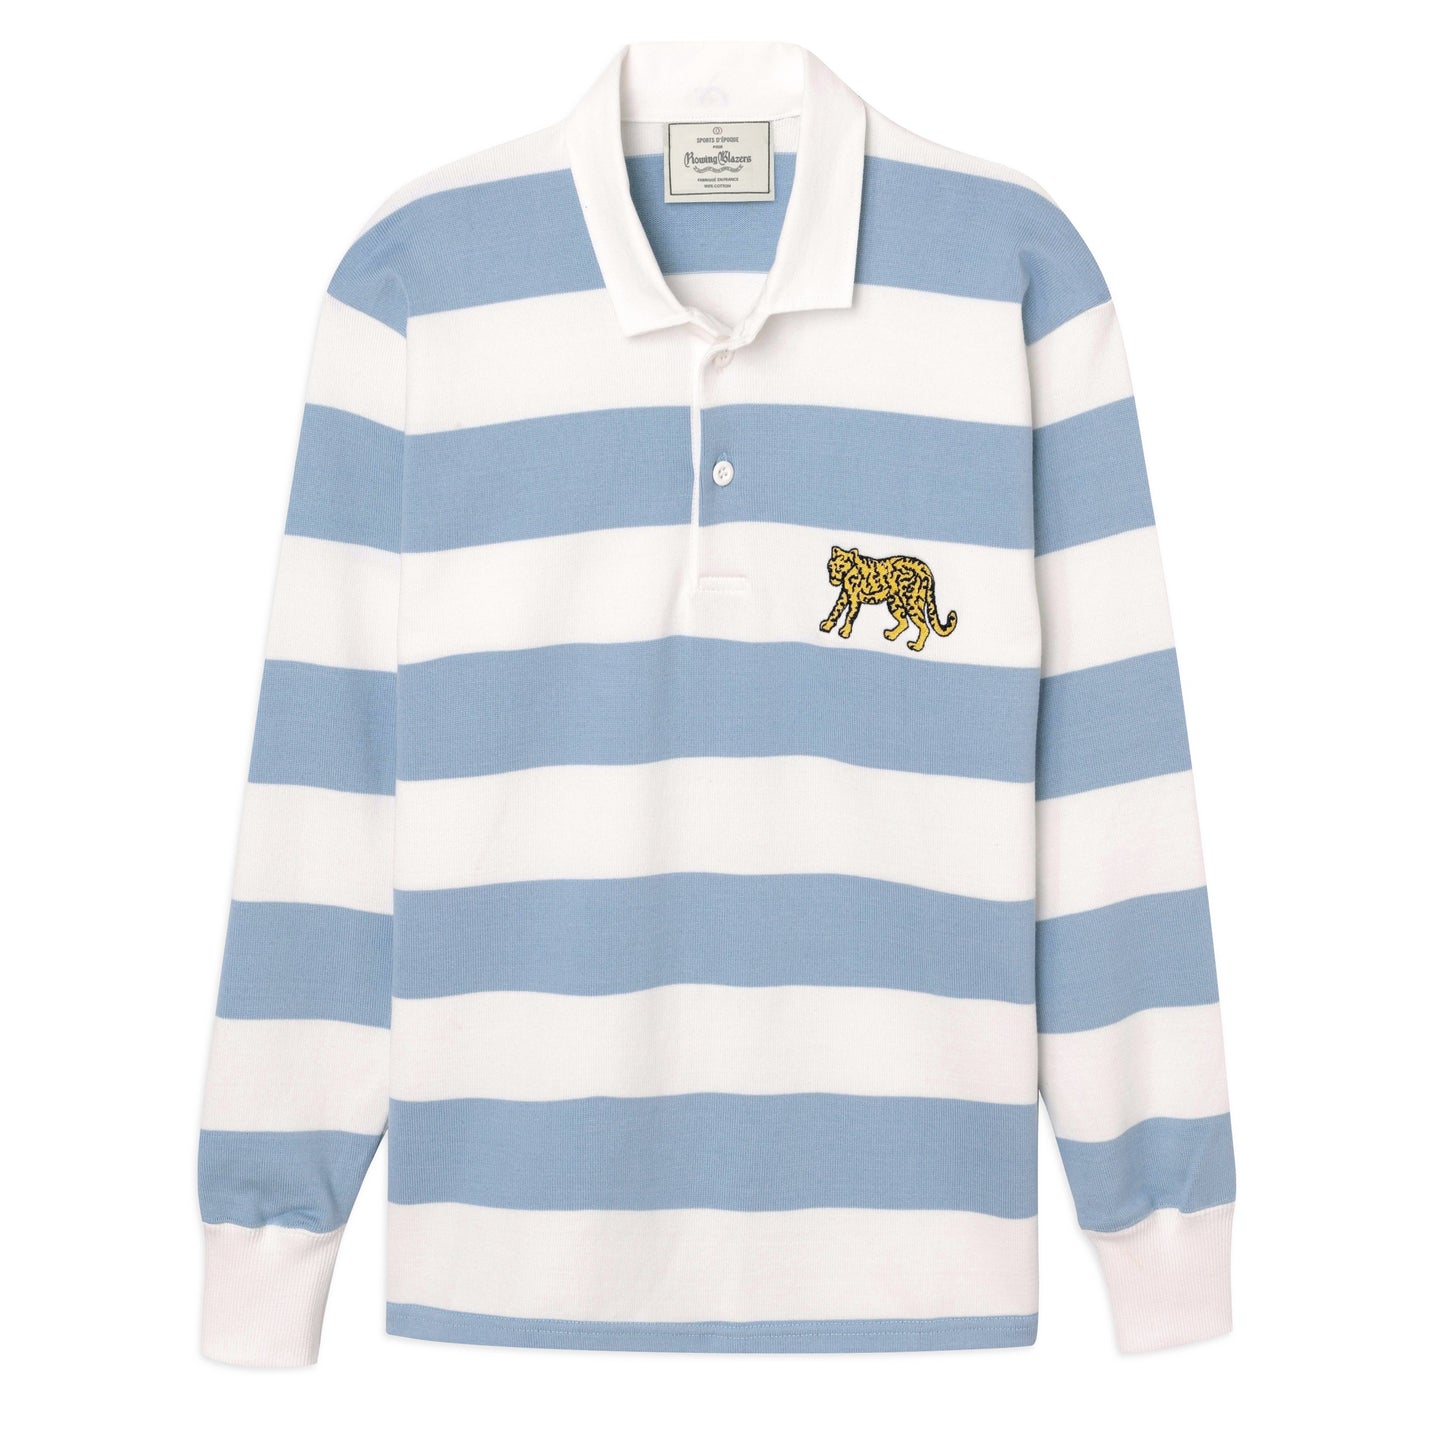 White and light-blue striped rugby jersey with embroidered "puma."